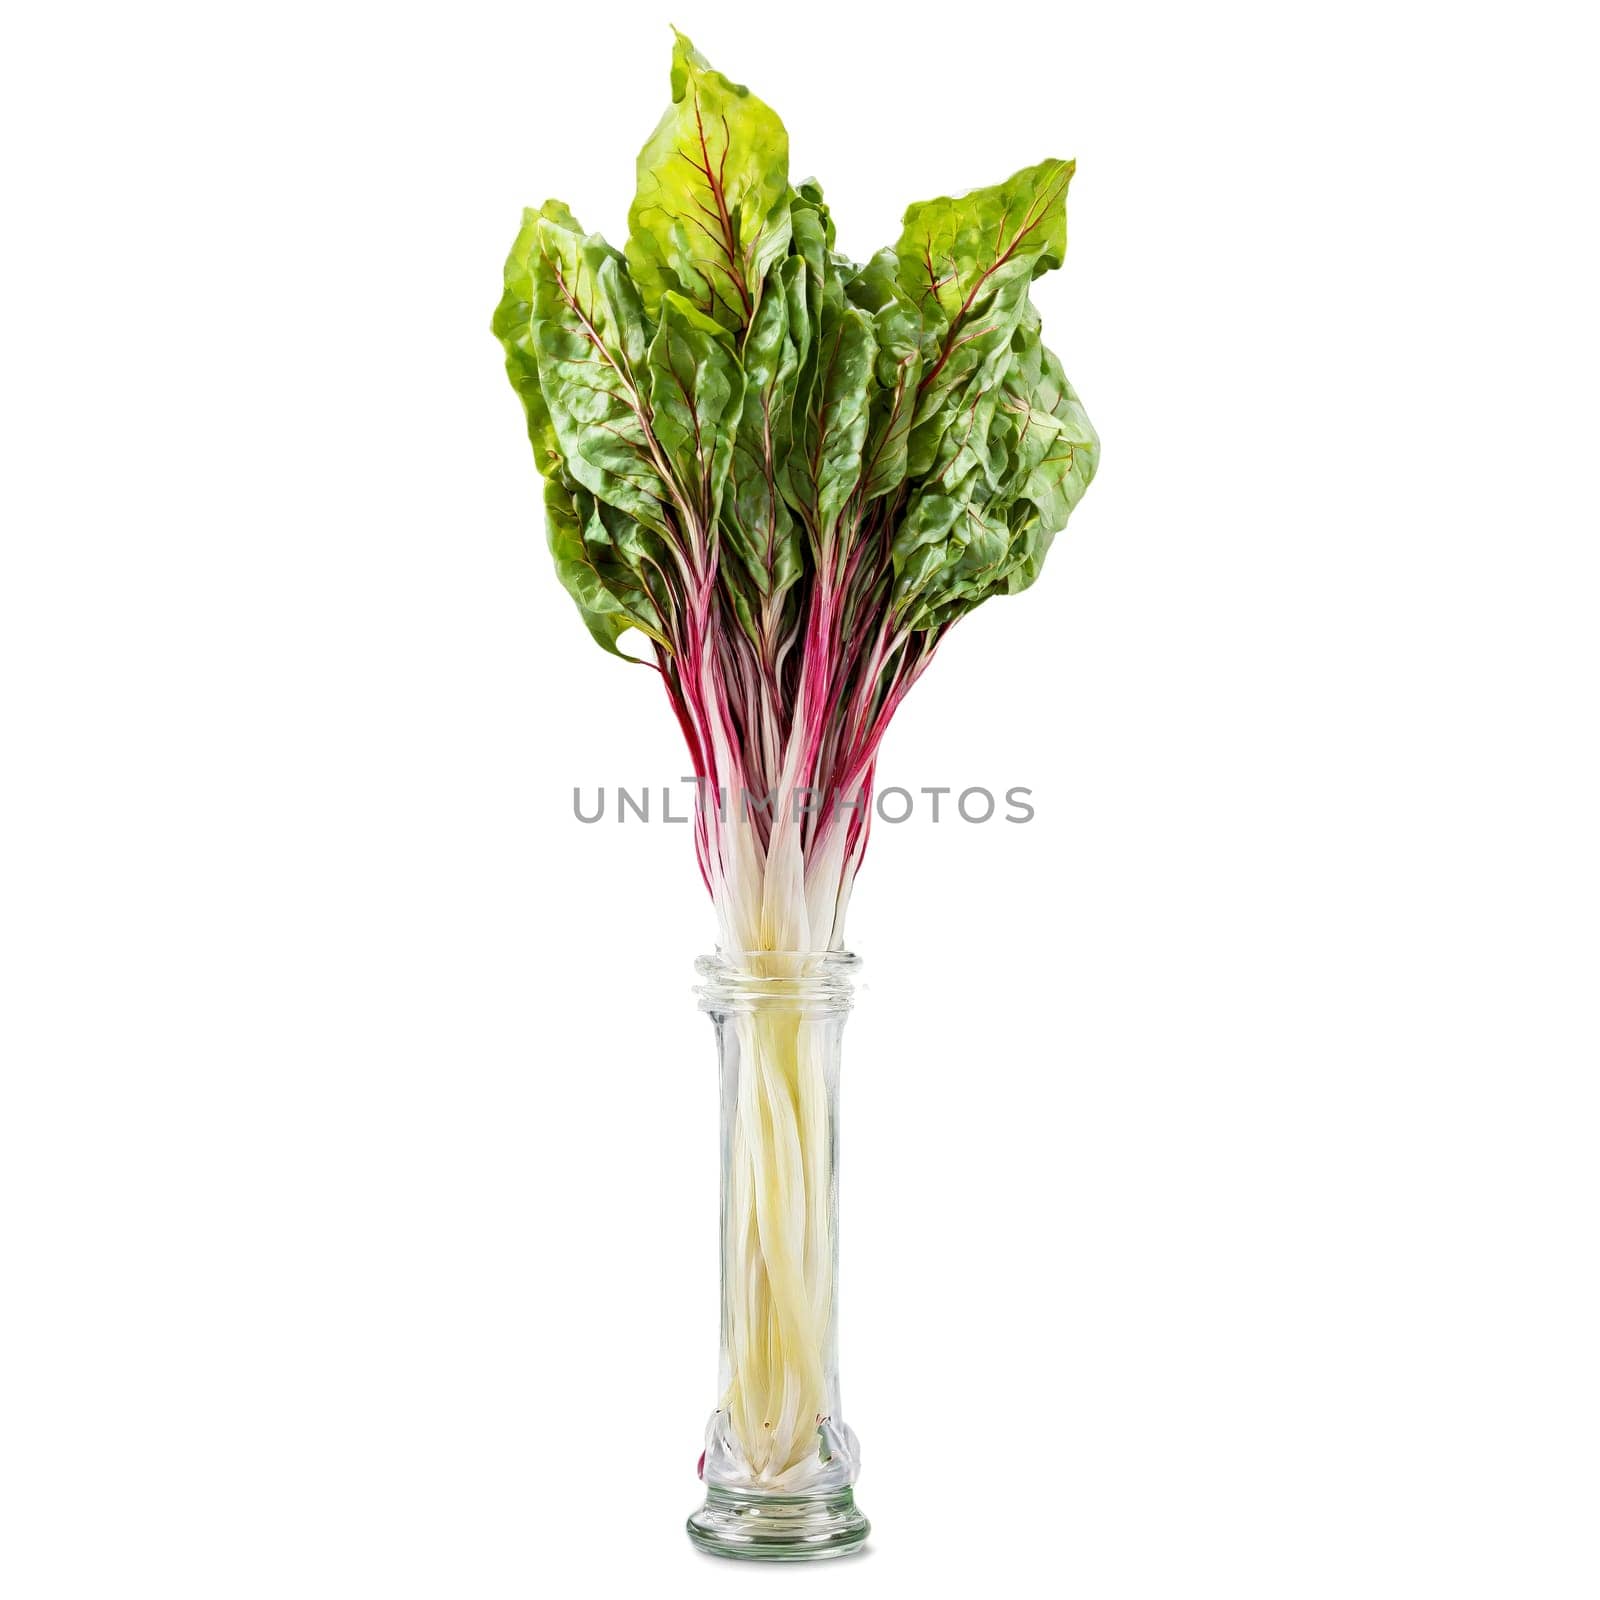 Pickled chard stems colorful and crunchy tumbling out of a jar with rainbow chard leaves. Food isolated on transparent background.